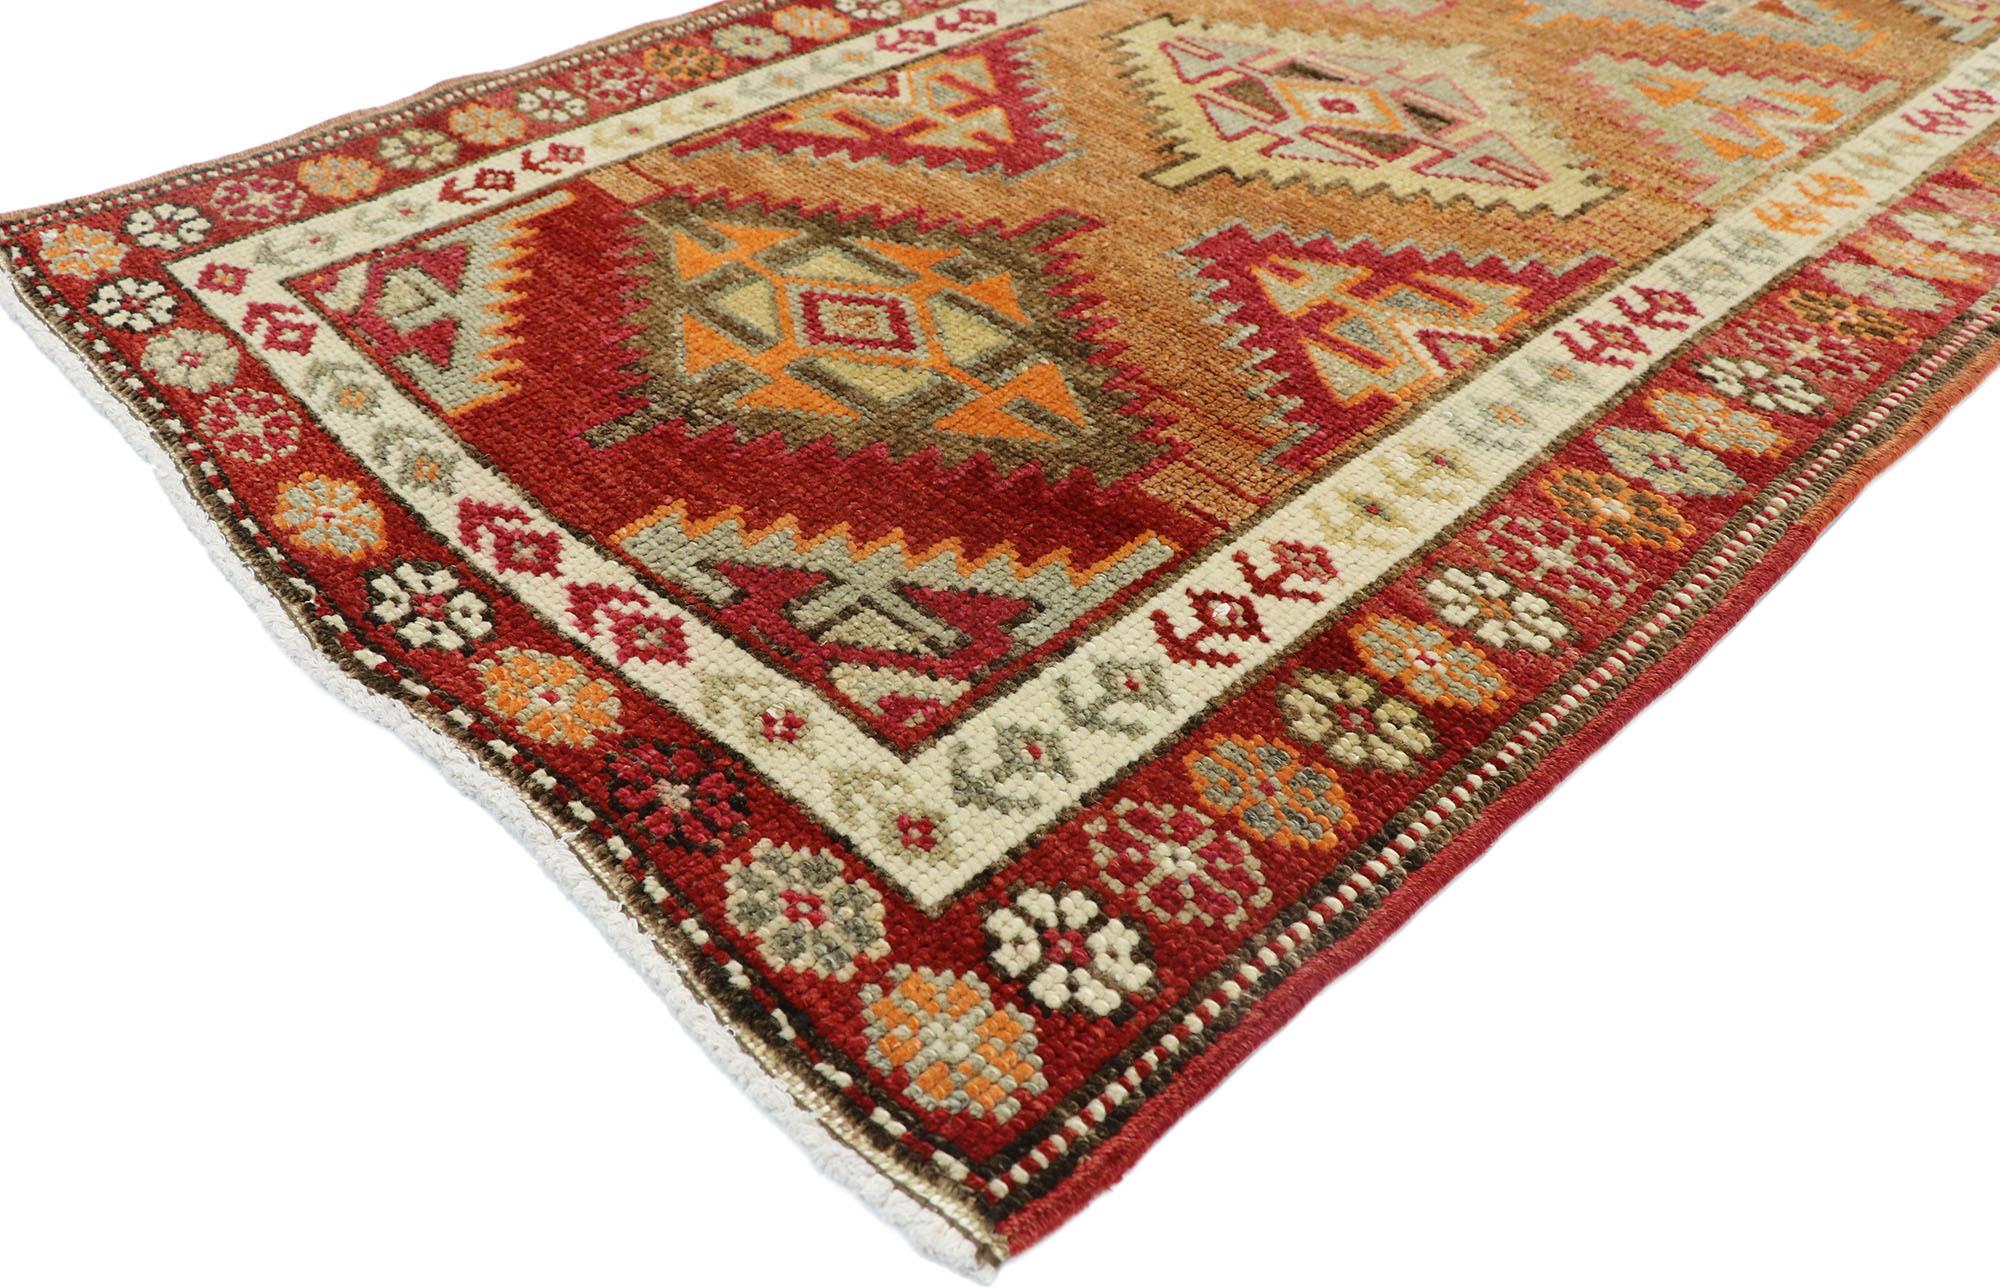 52704 vintage Turkish Oushak runner with warm Santa Fe desert Tribal style 02'09 x 11'09. With vibrant hues and warm earth-tones combined with a bold geometric form, this hand knotted wool vintage Turkish Oushak runner manages to beautifully meld